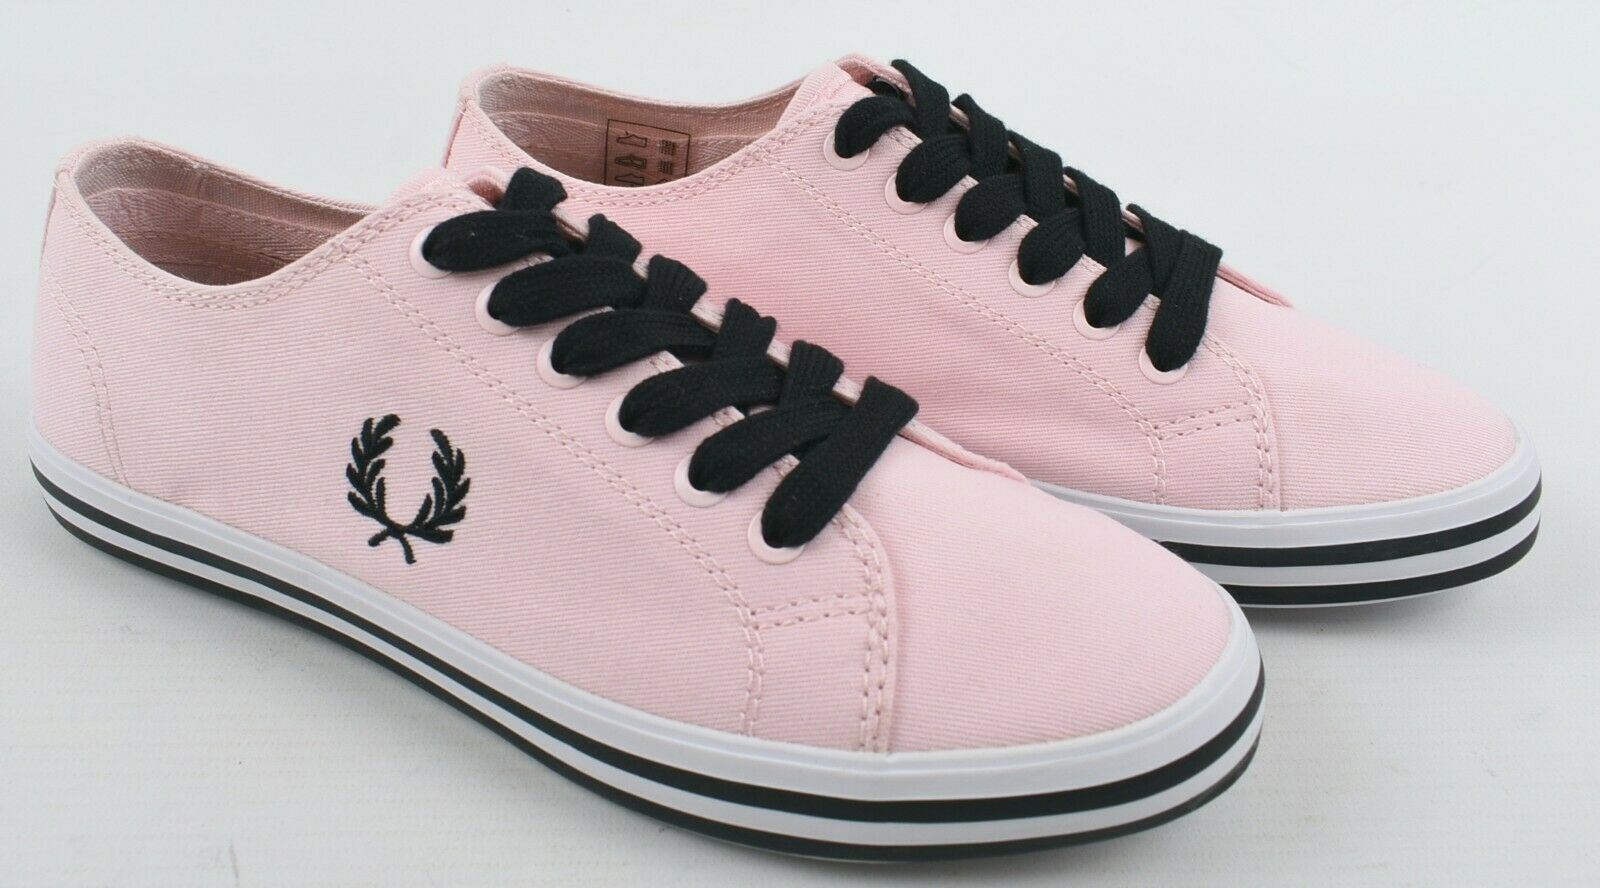 FRED PERRY Women's KINGSTON TWILL Trainers, Iced Pink, size UK 4 /EU 37